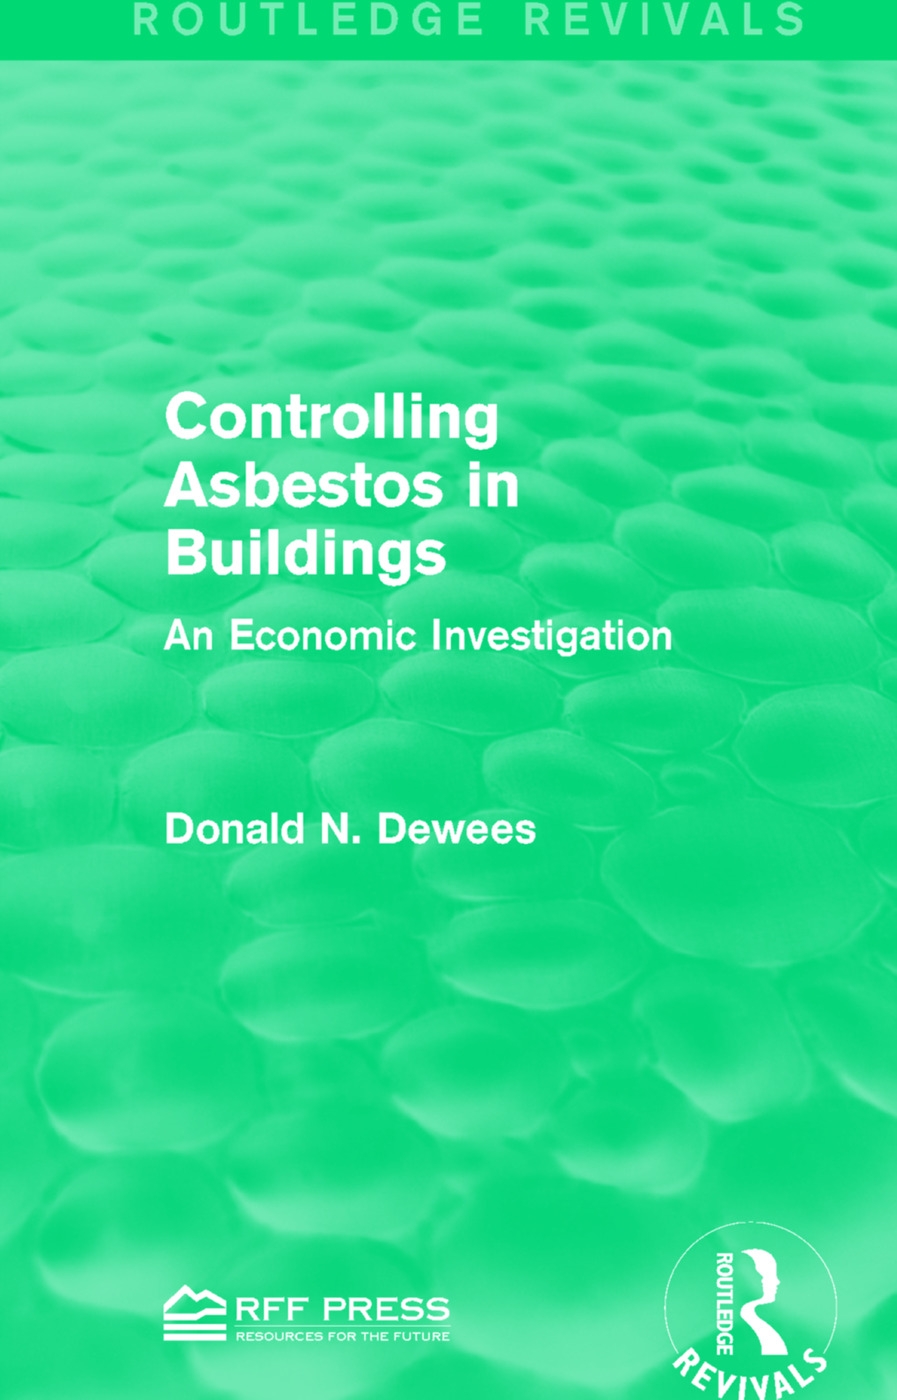 Controlling Asbestos in Buildings: An Economic Investigation